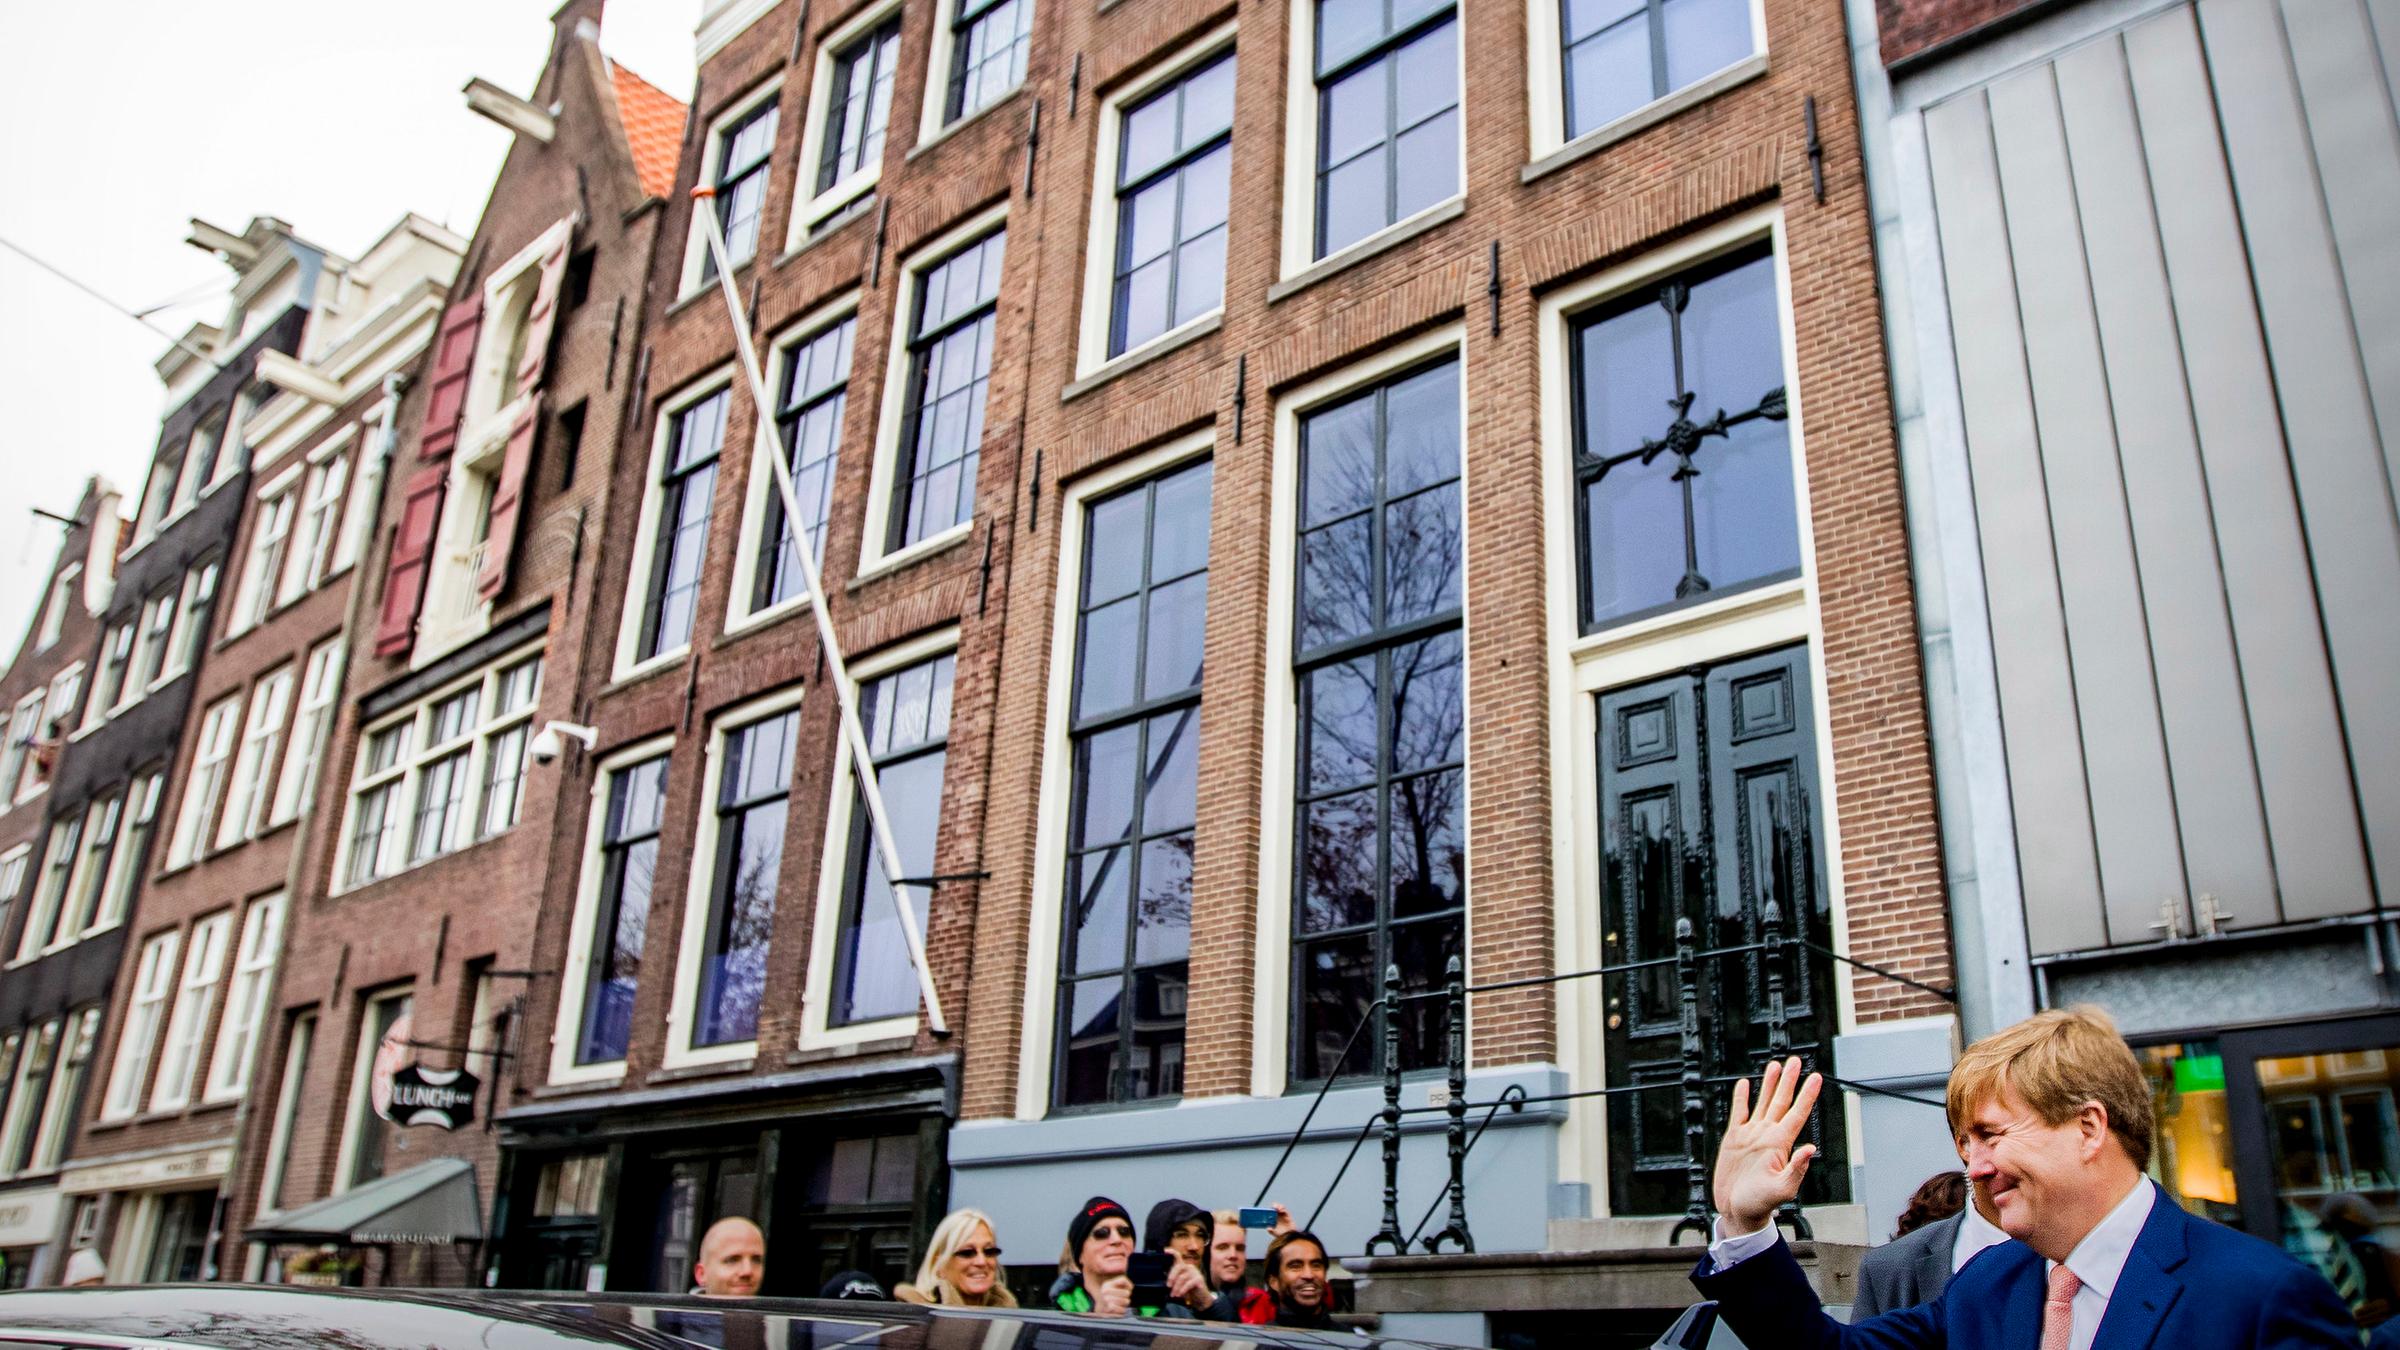 52 Top Pictures Anne Frank Haus Amsterdam / Pin On